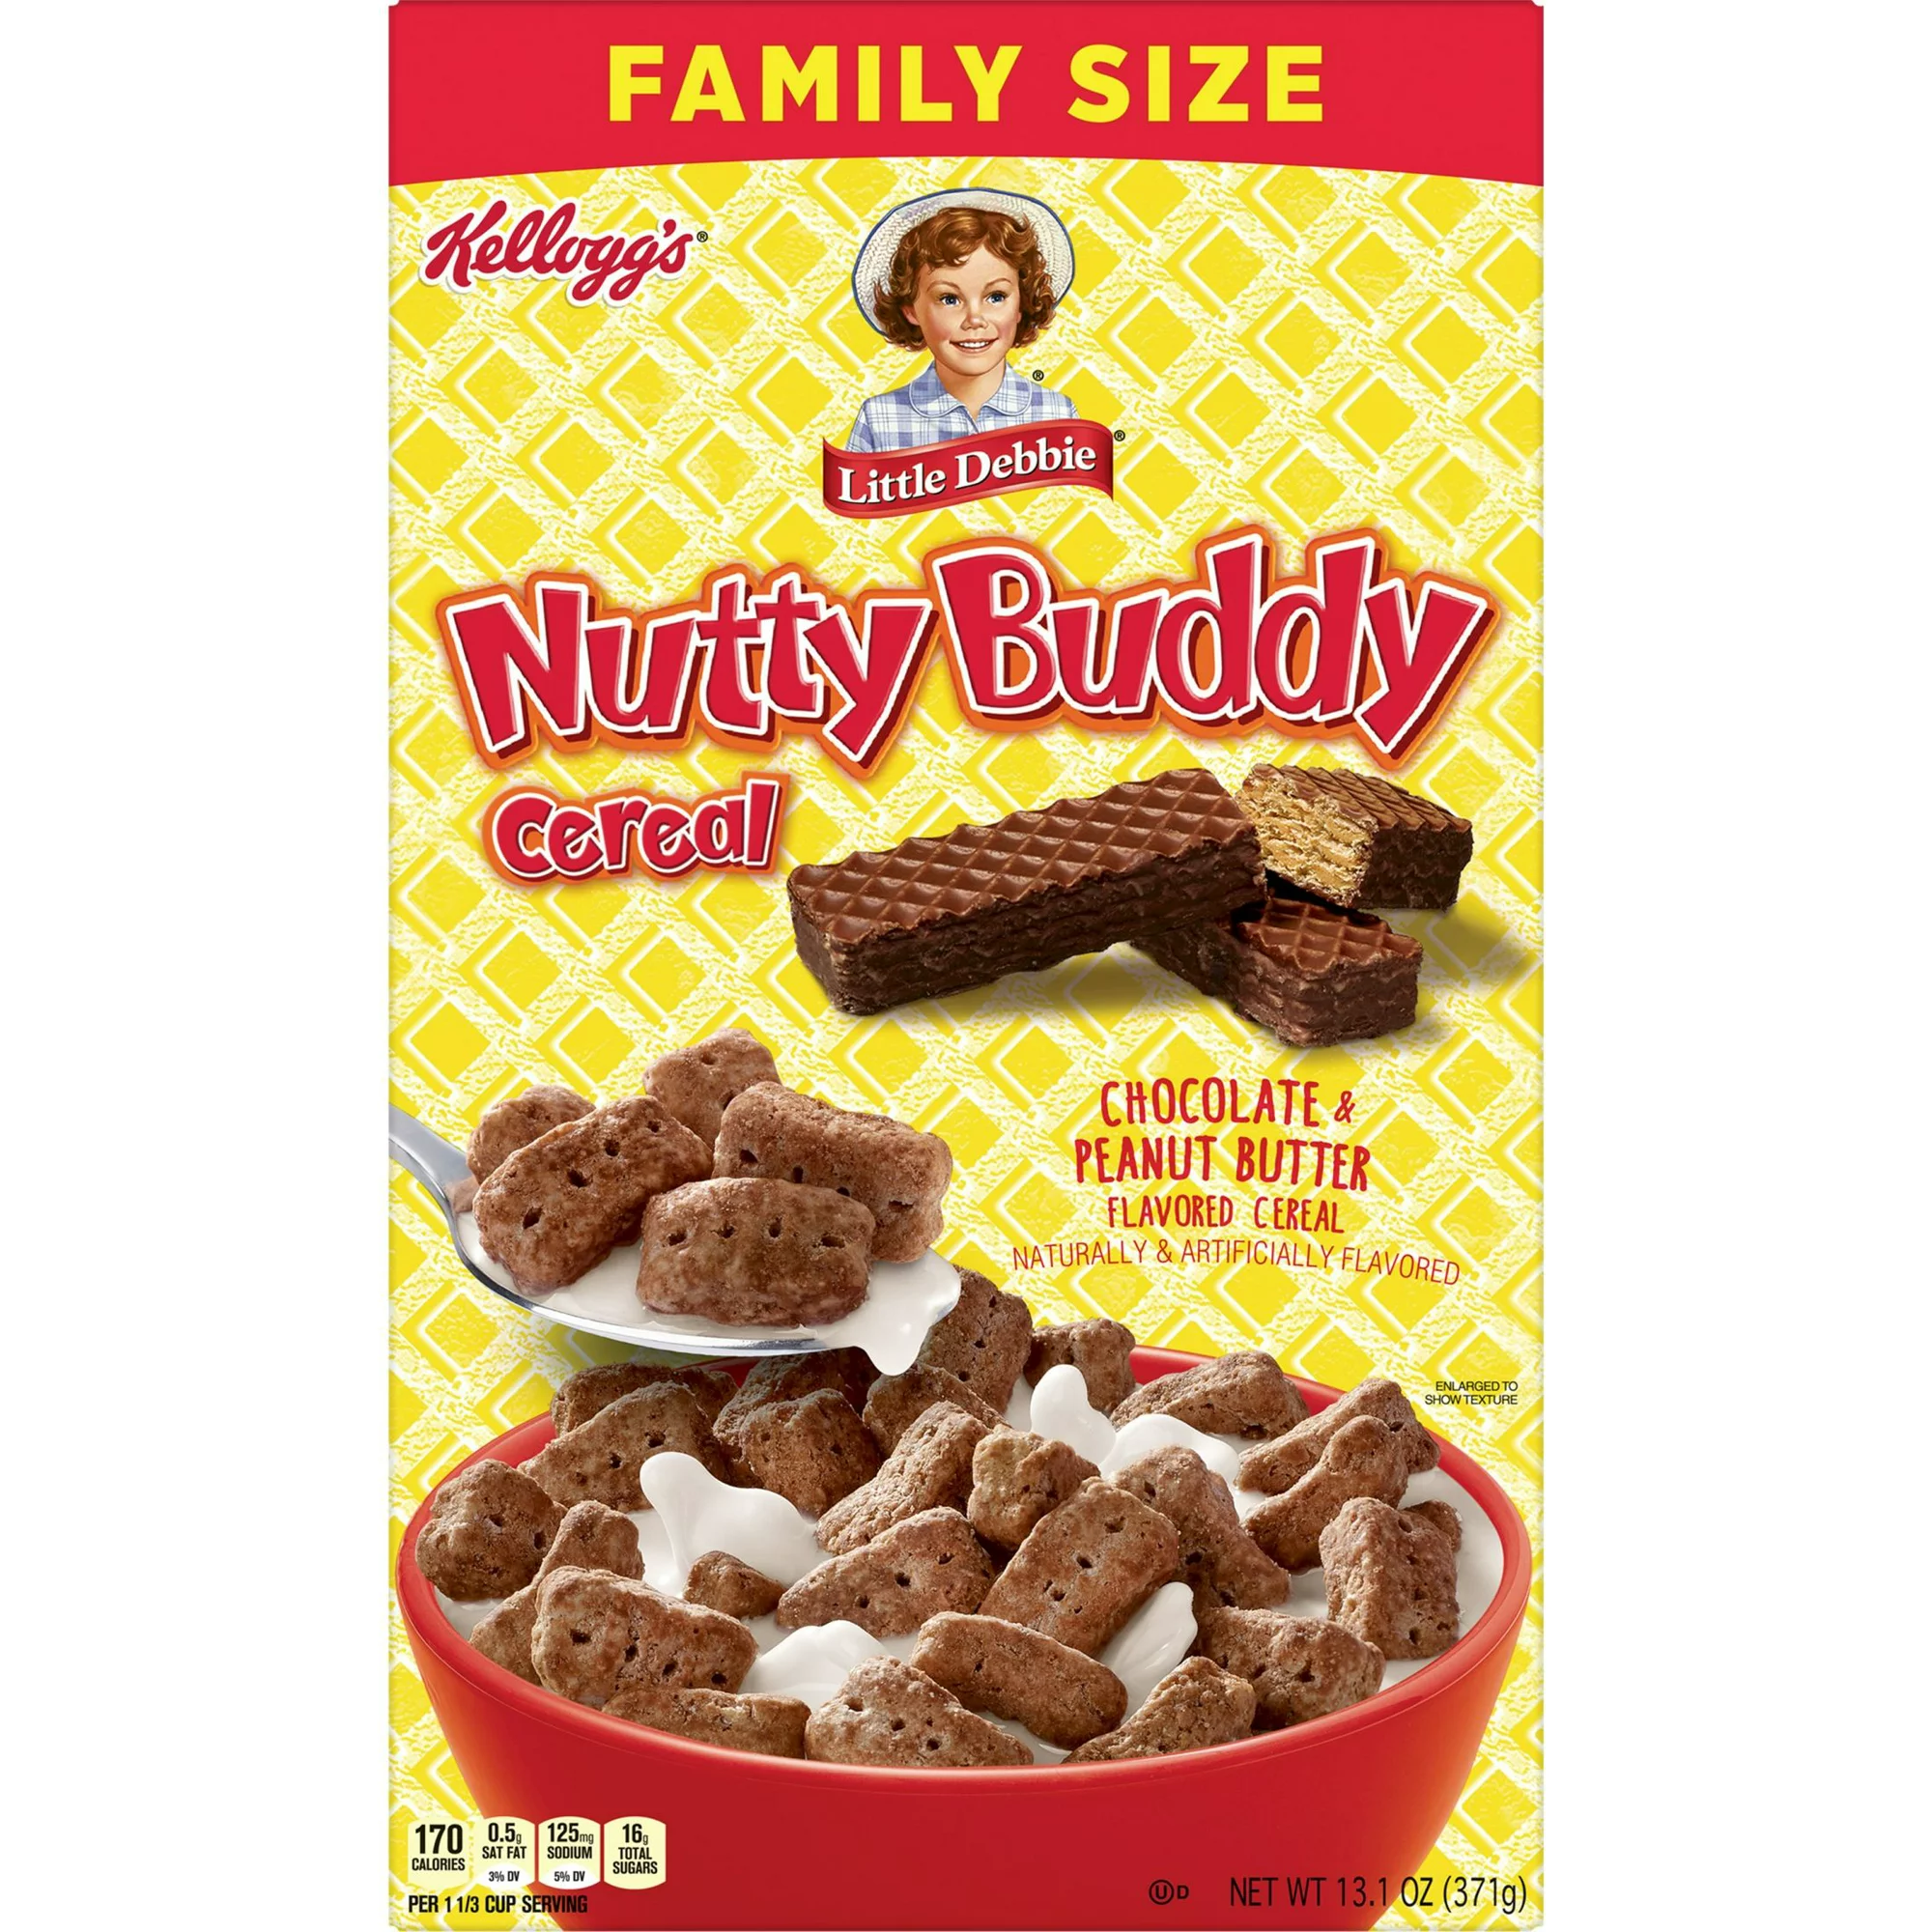 Savor the delightful combination of creamy peanut butter and crunchy chocolate, inspired by the classic Little Debbie Nutty Buddy snack.